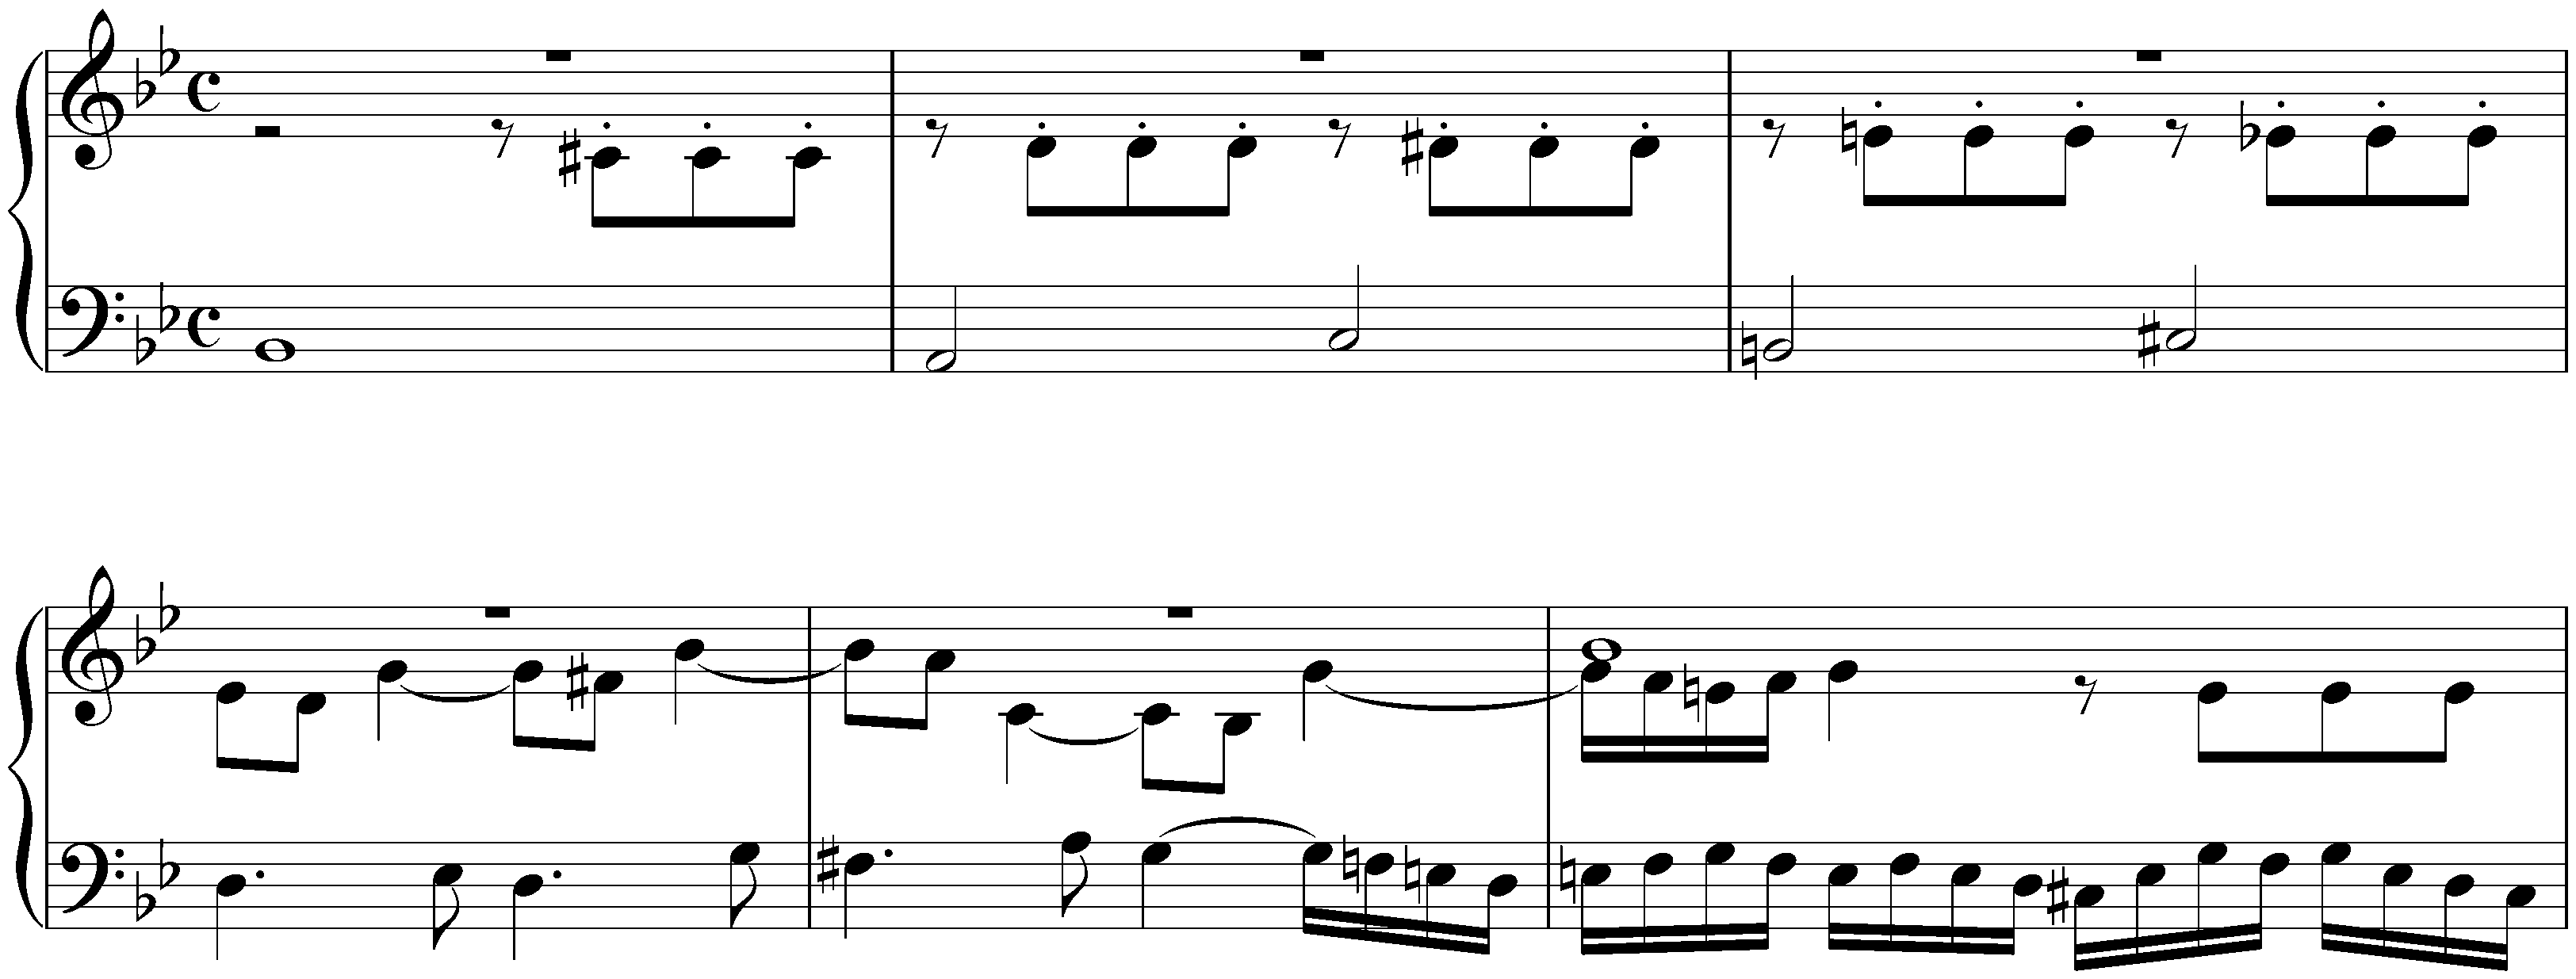 Fugue in G minor on B-A-C-H, BWV Anh. 109